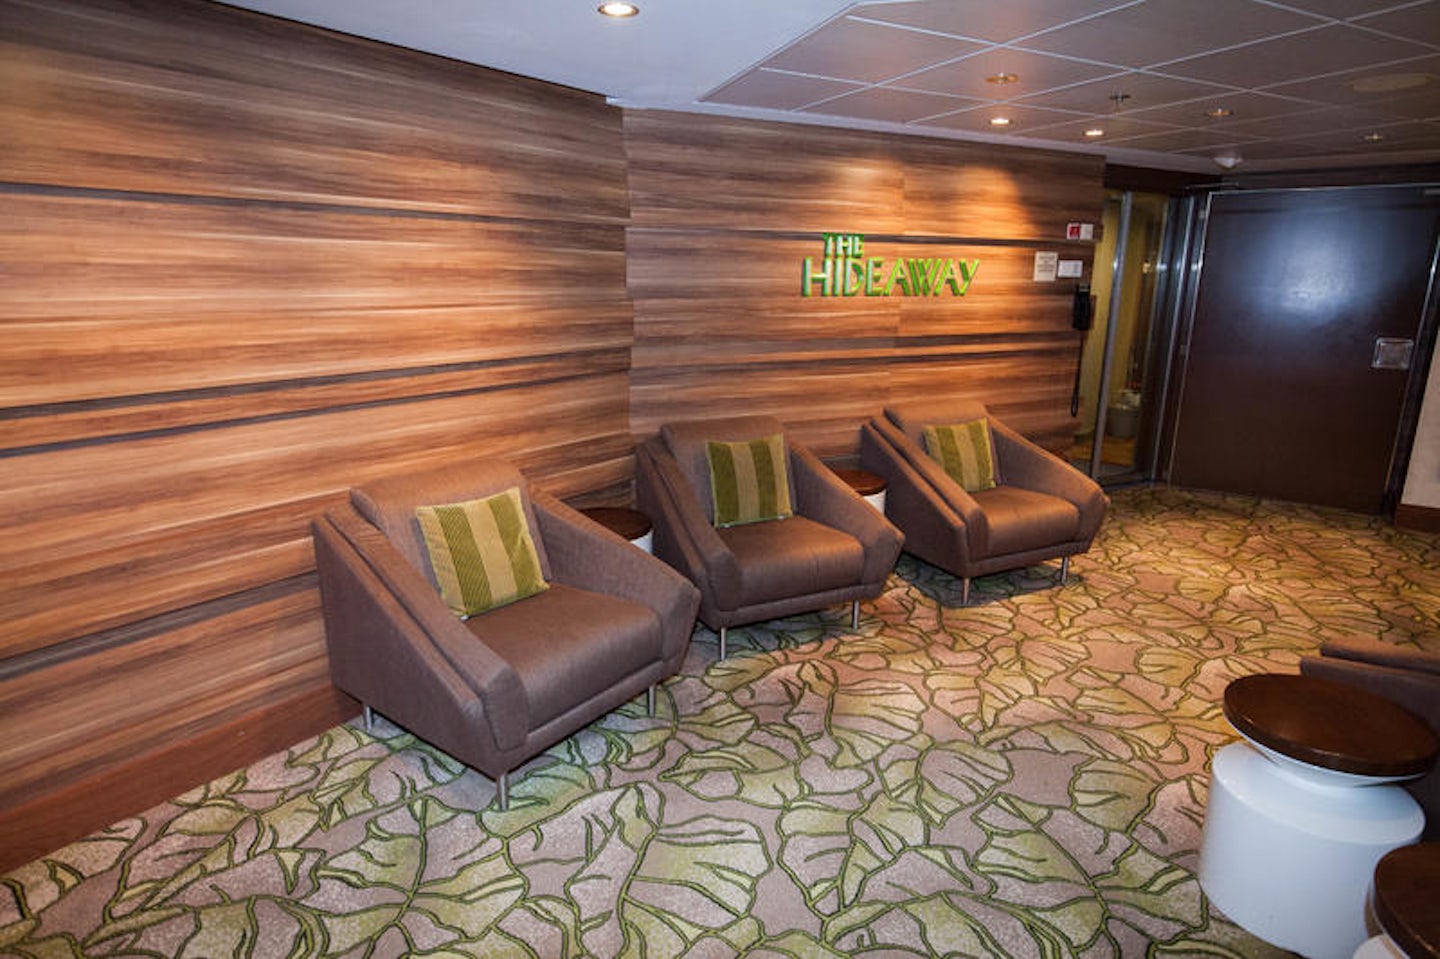 The Hideaway on Celebrity Reflection